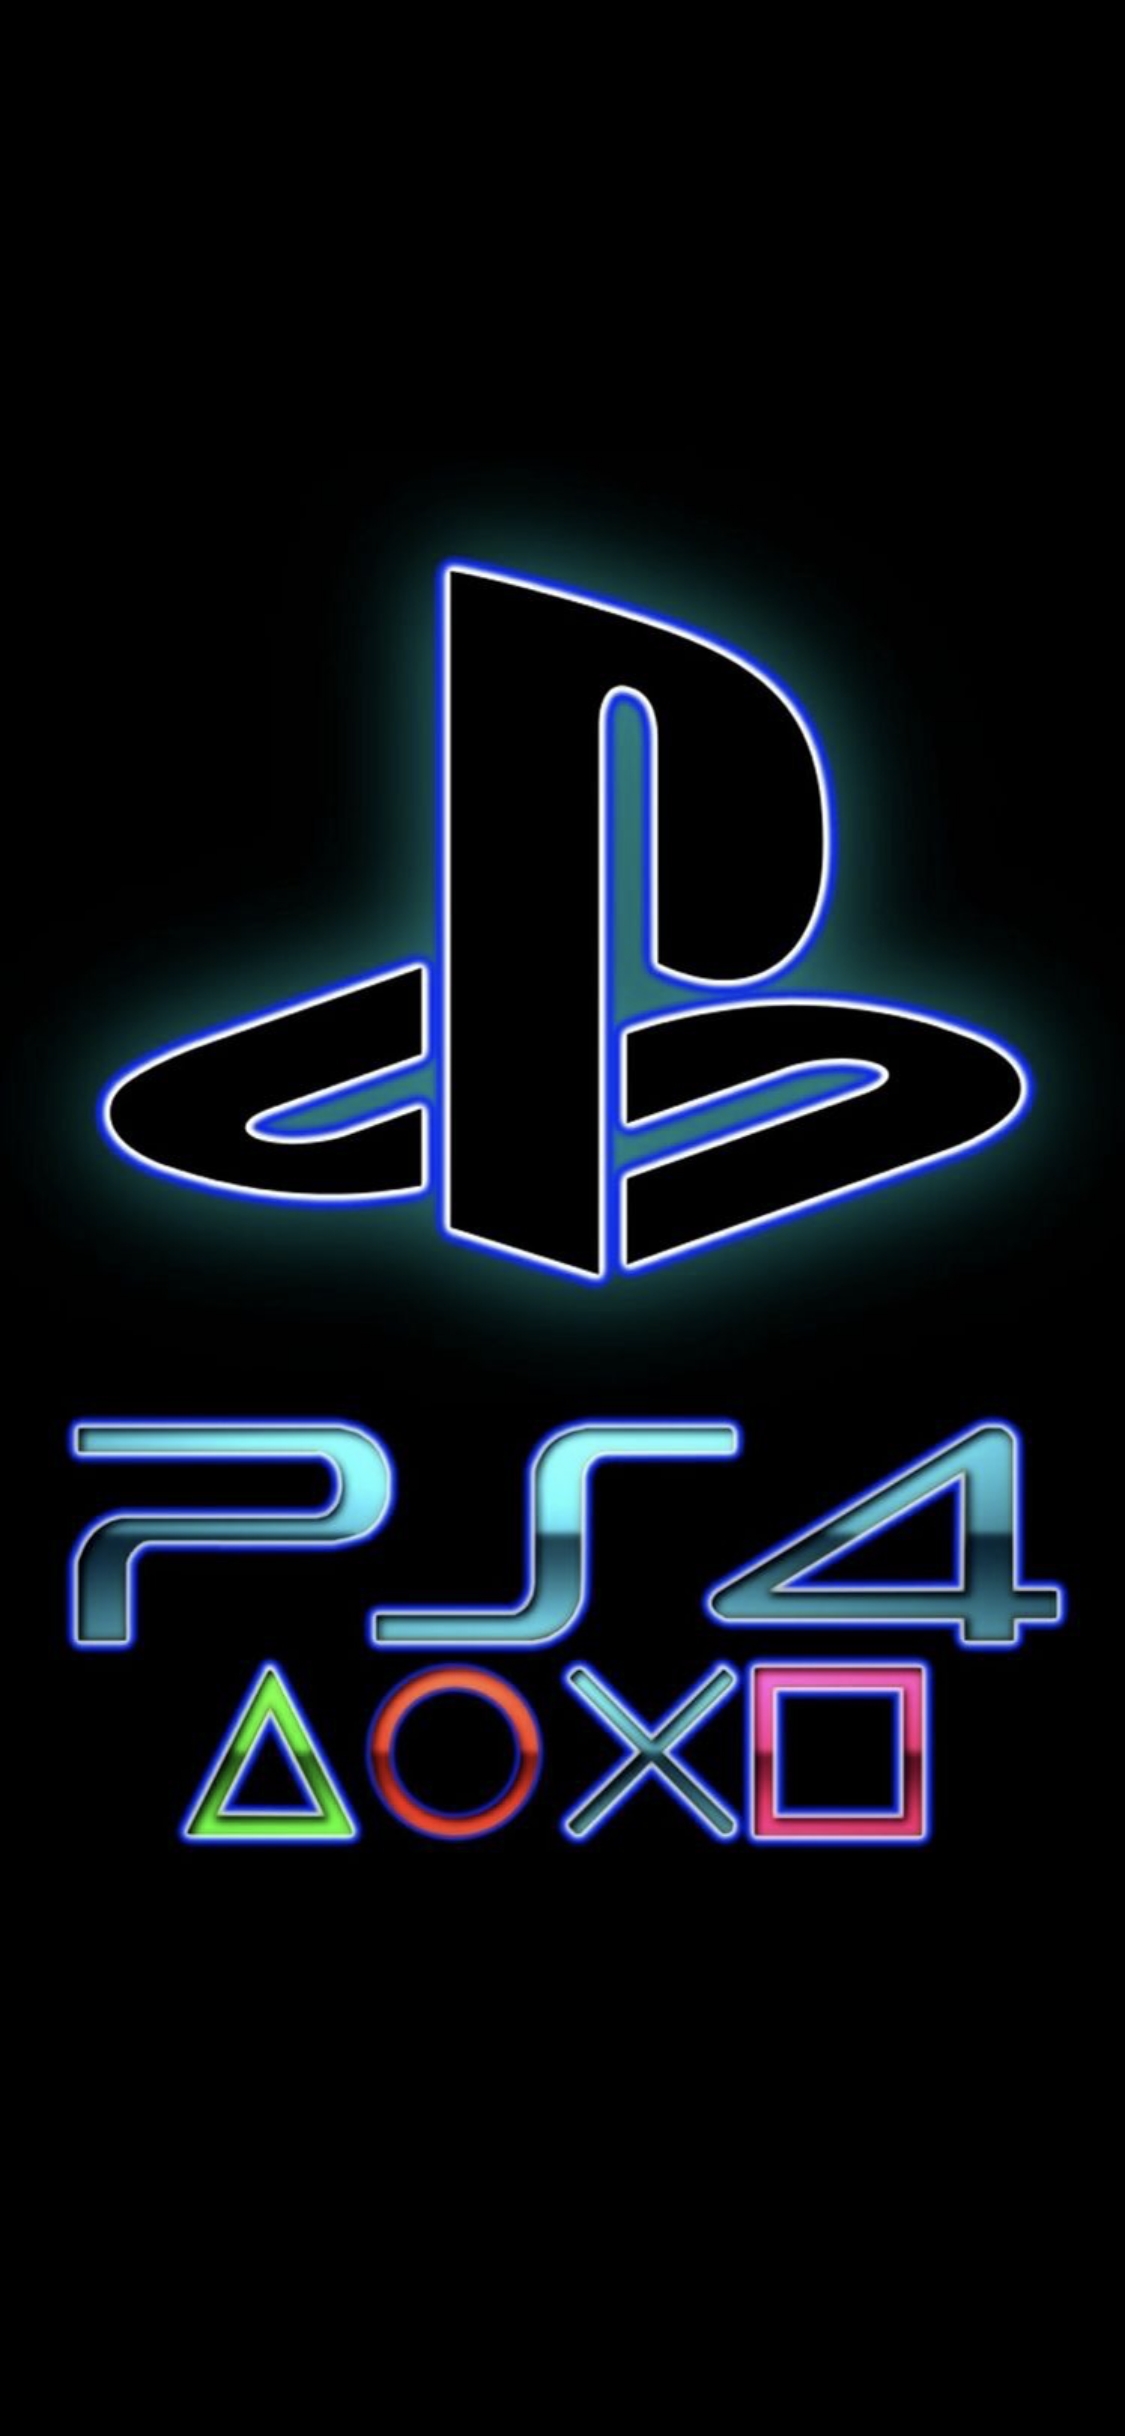 wallpaper iphone x. Ps4 games, Game wallpaper iphone, Video games ps4